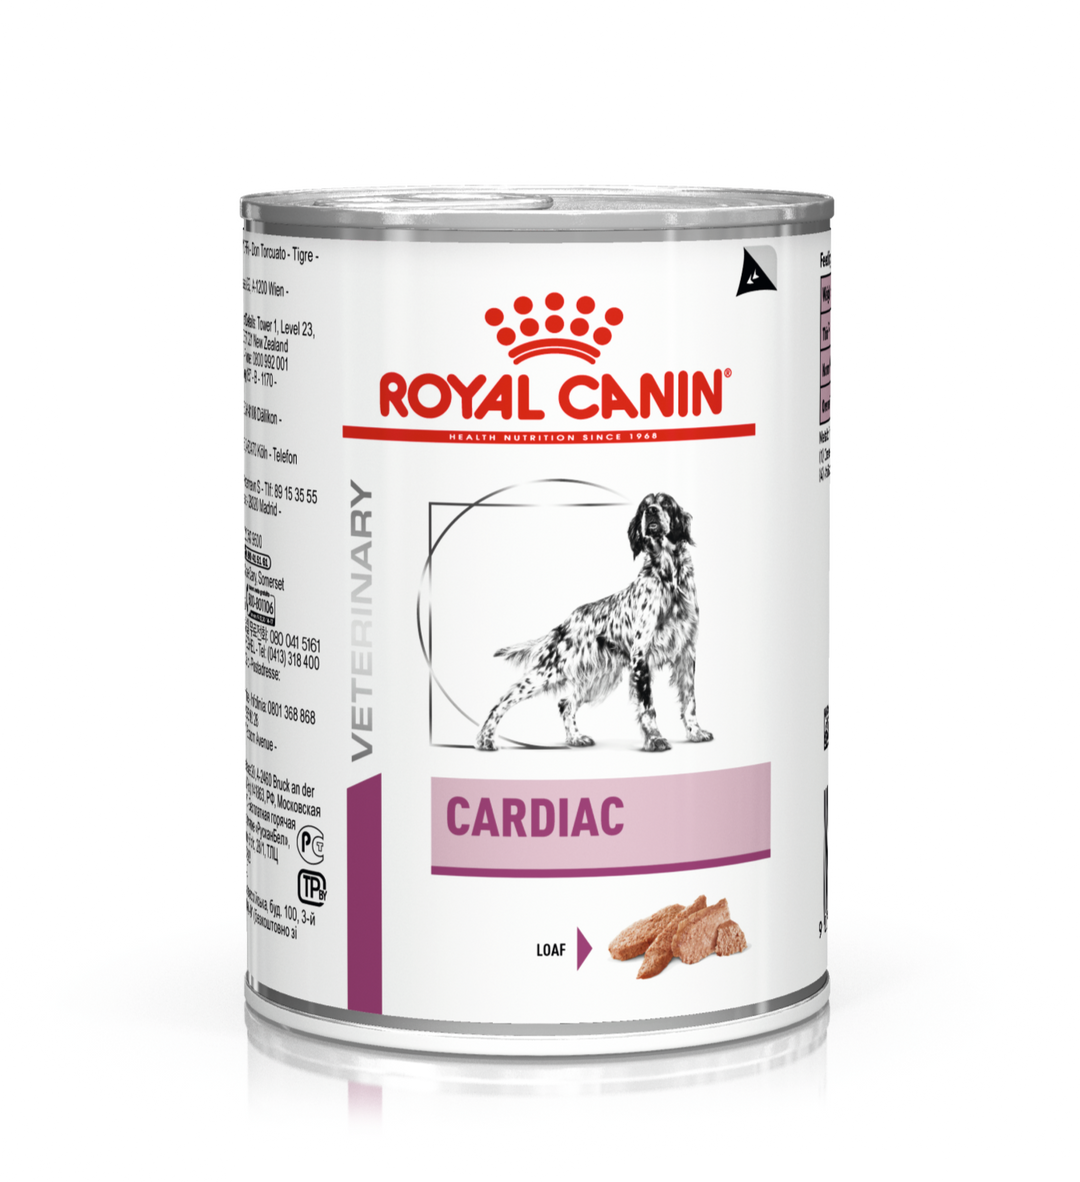 Royal Canin Cardiac 410g for Dogs Canned